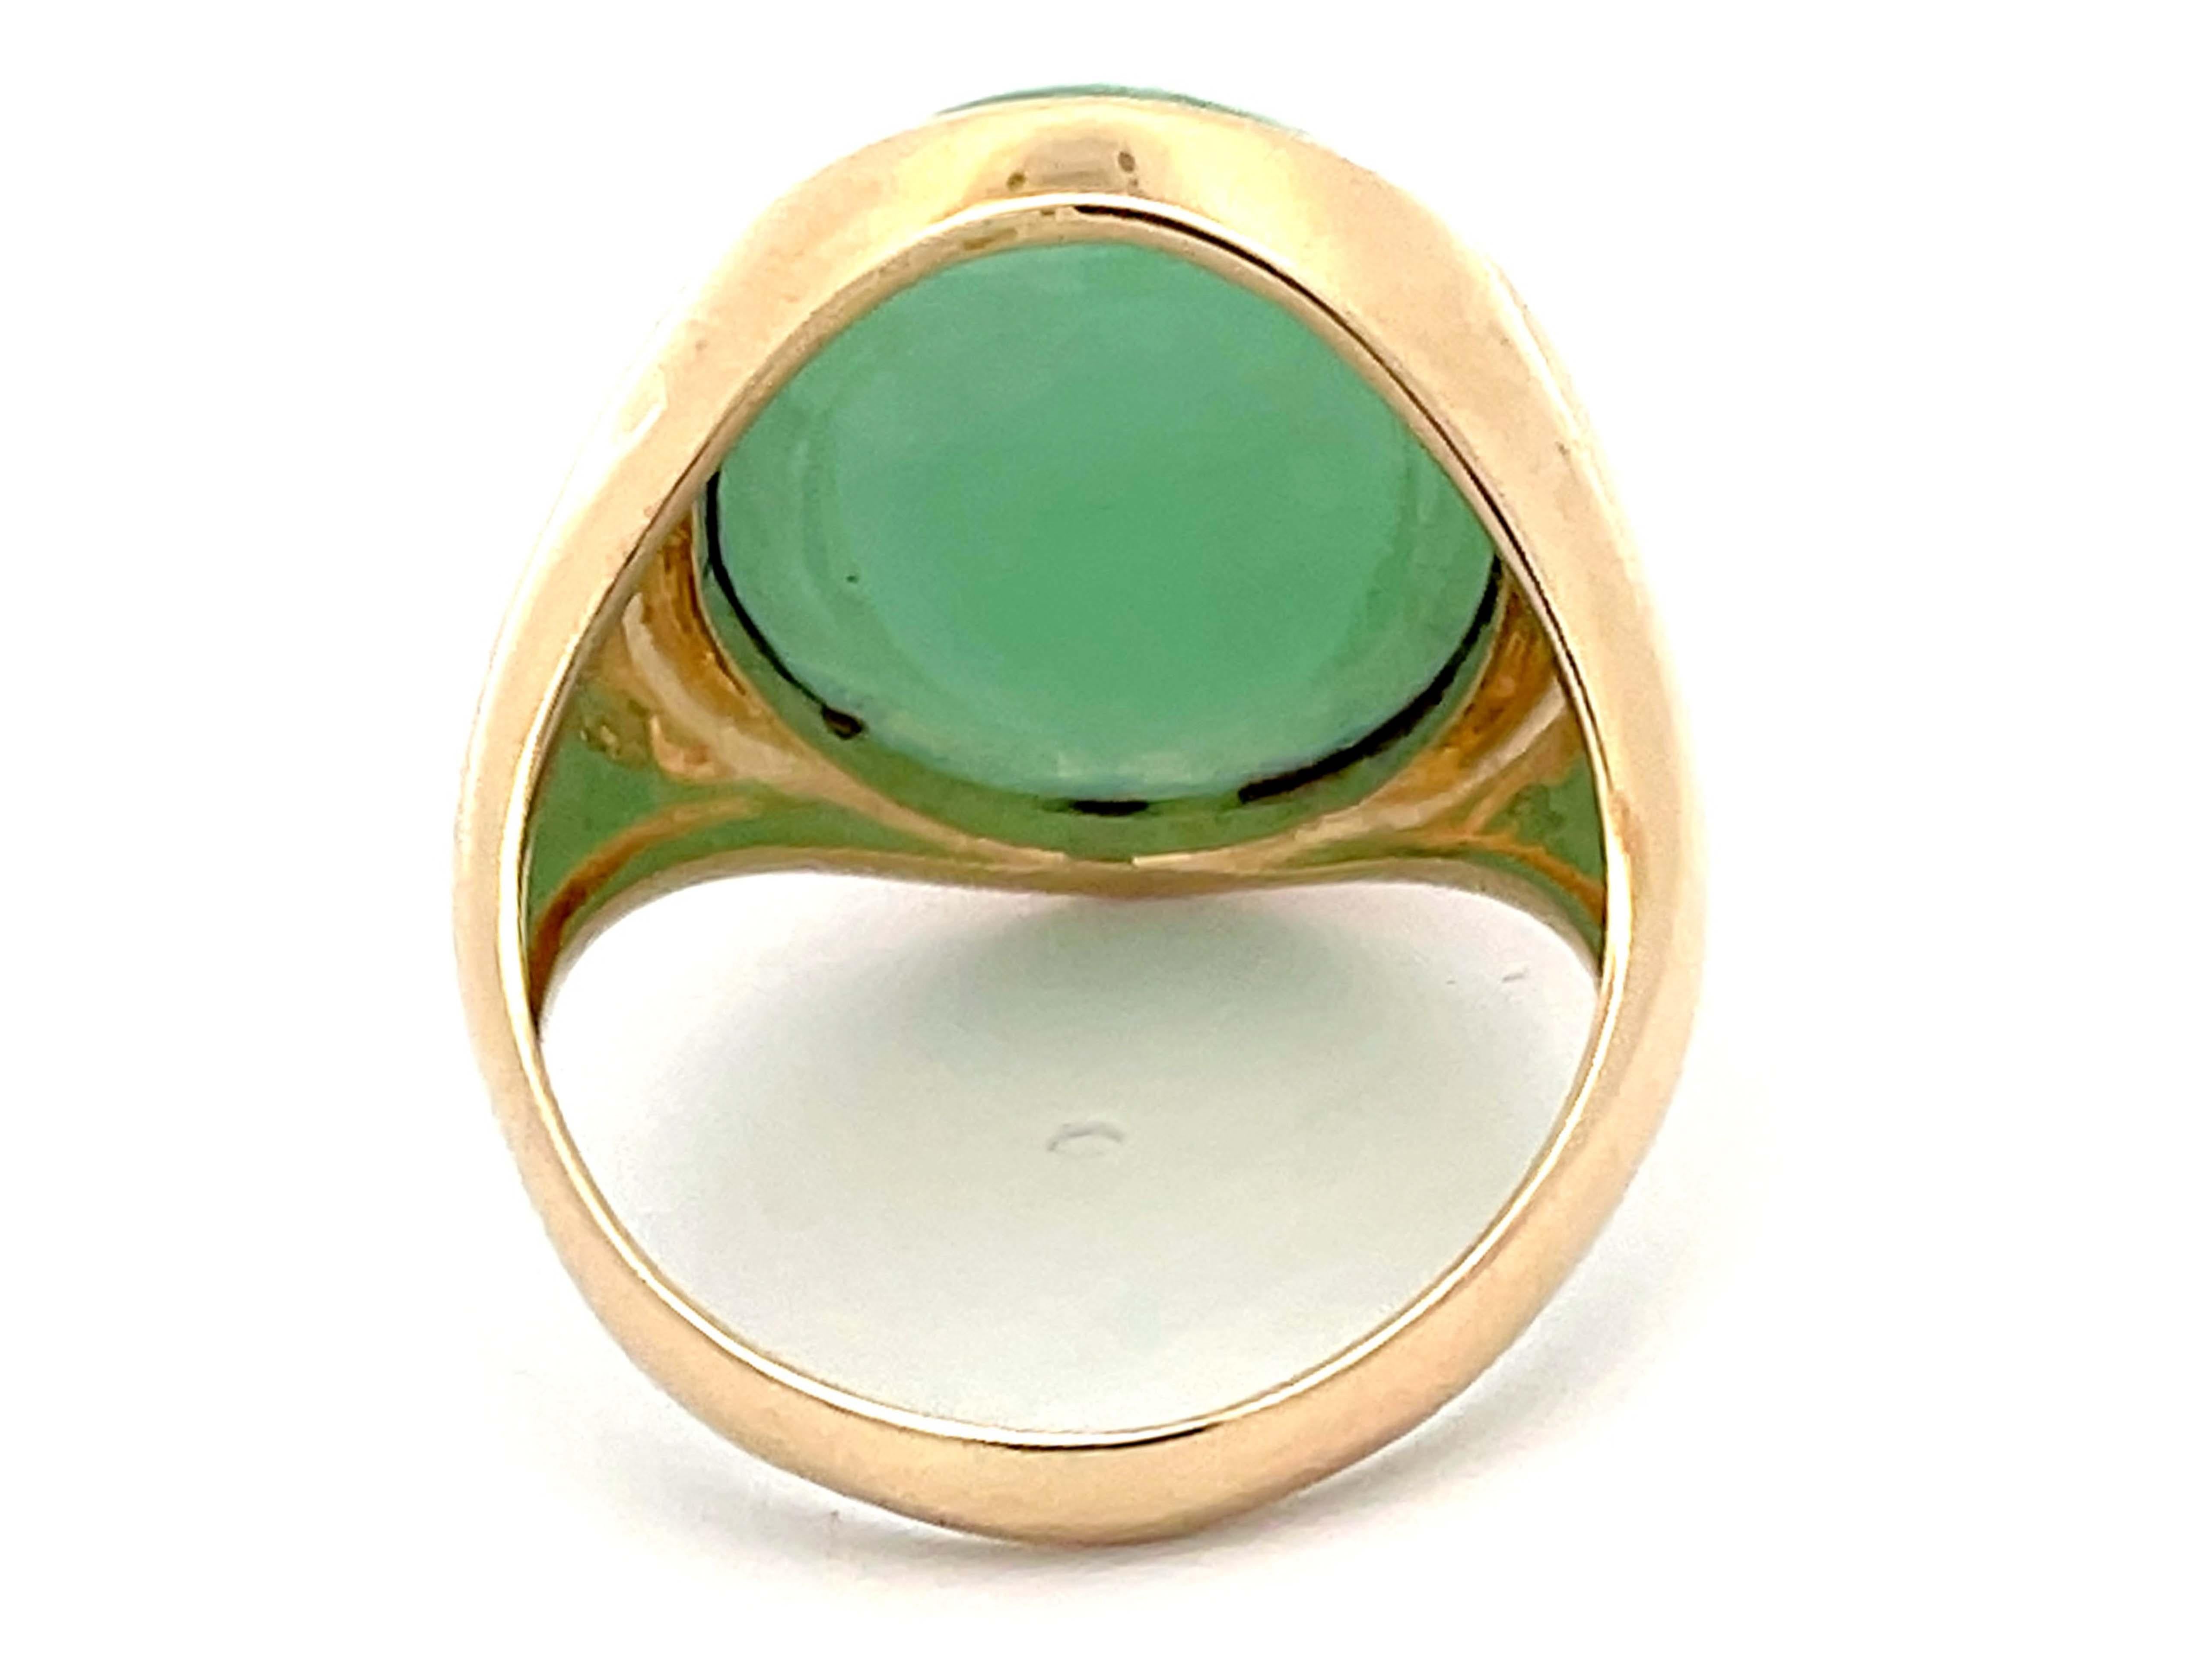 22 Carat Oval Cabochon Green Jade Ring in 14k Yellow Gold For Sale 1